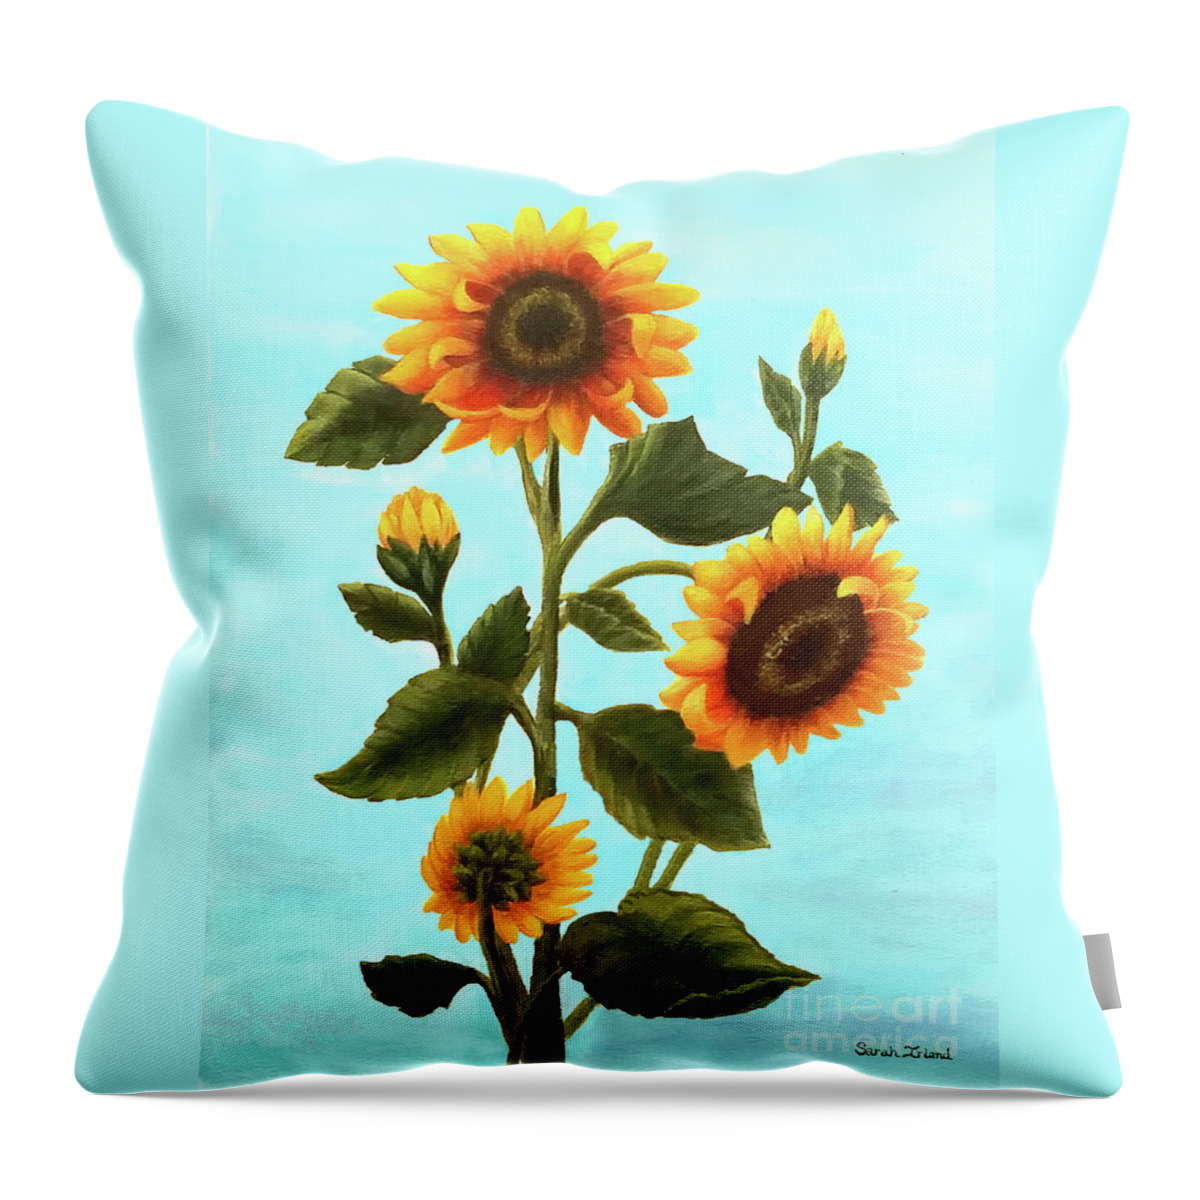 Portrait Throw Pillow featuring the painting Sunflowers on Blue by Sarah Irland